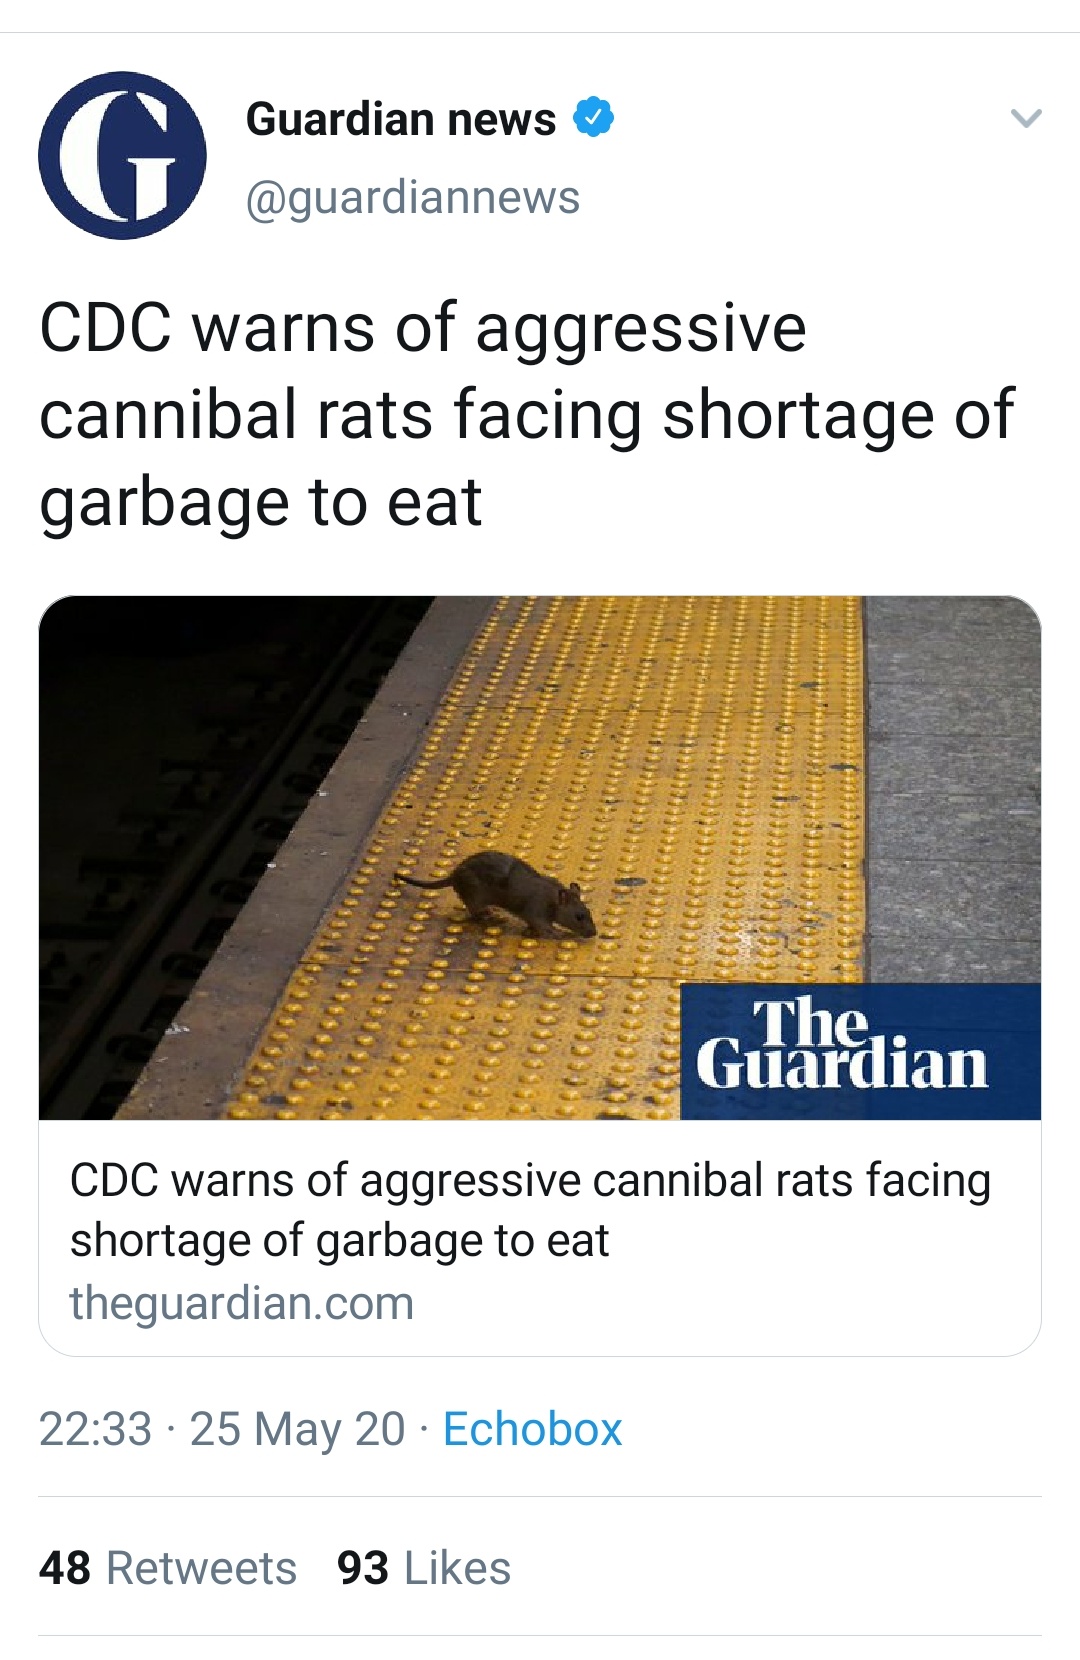 feather and two stones - Guardian news G Cdc warns of aggressive cannibal rats facing shortage of garbage to eat The. Guardian Cdc warns of aggressive cannibal rats facing shortage of garbage to eat theguardian.com 25 May 20. Echobox 48 93